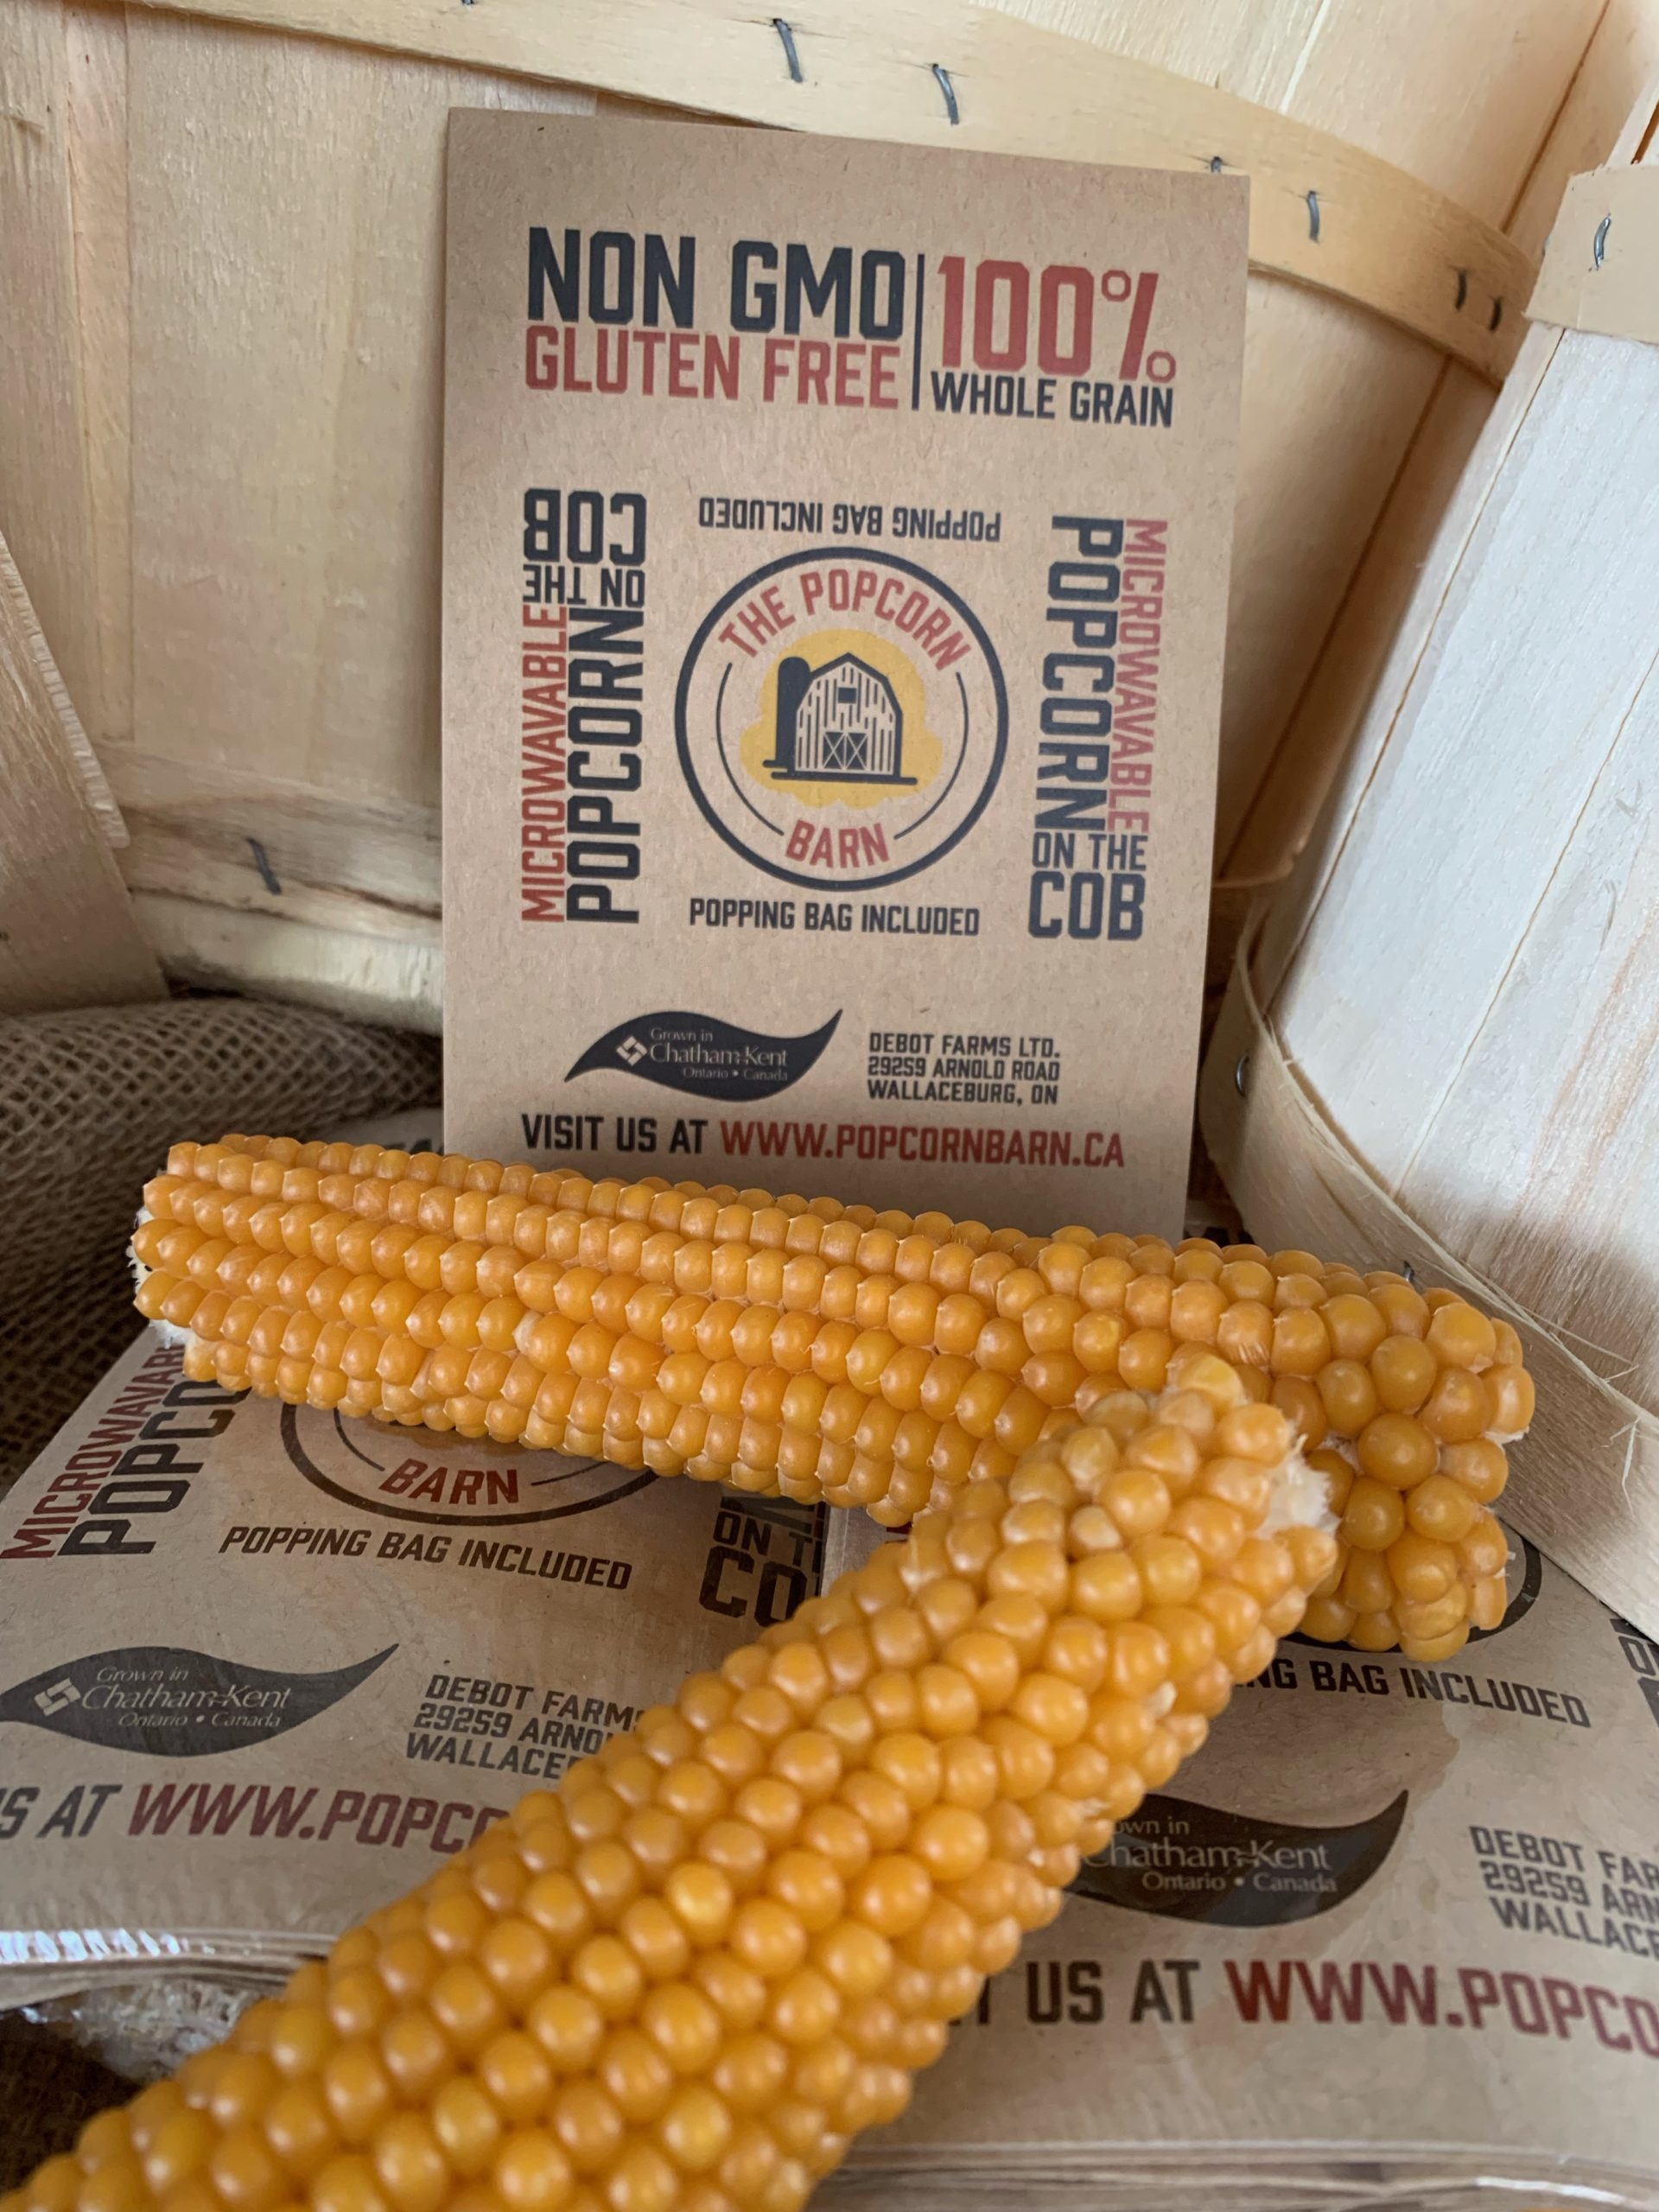 Popcorn on the Cob – The Market Pack